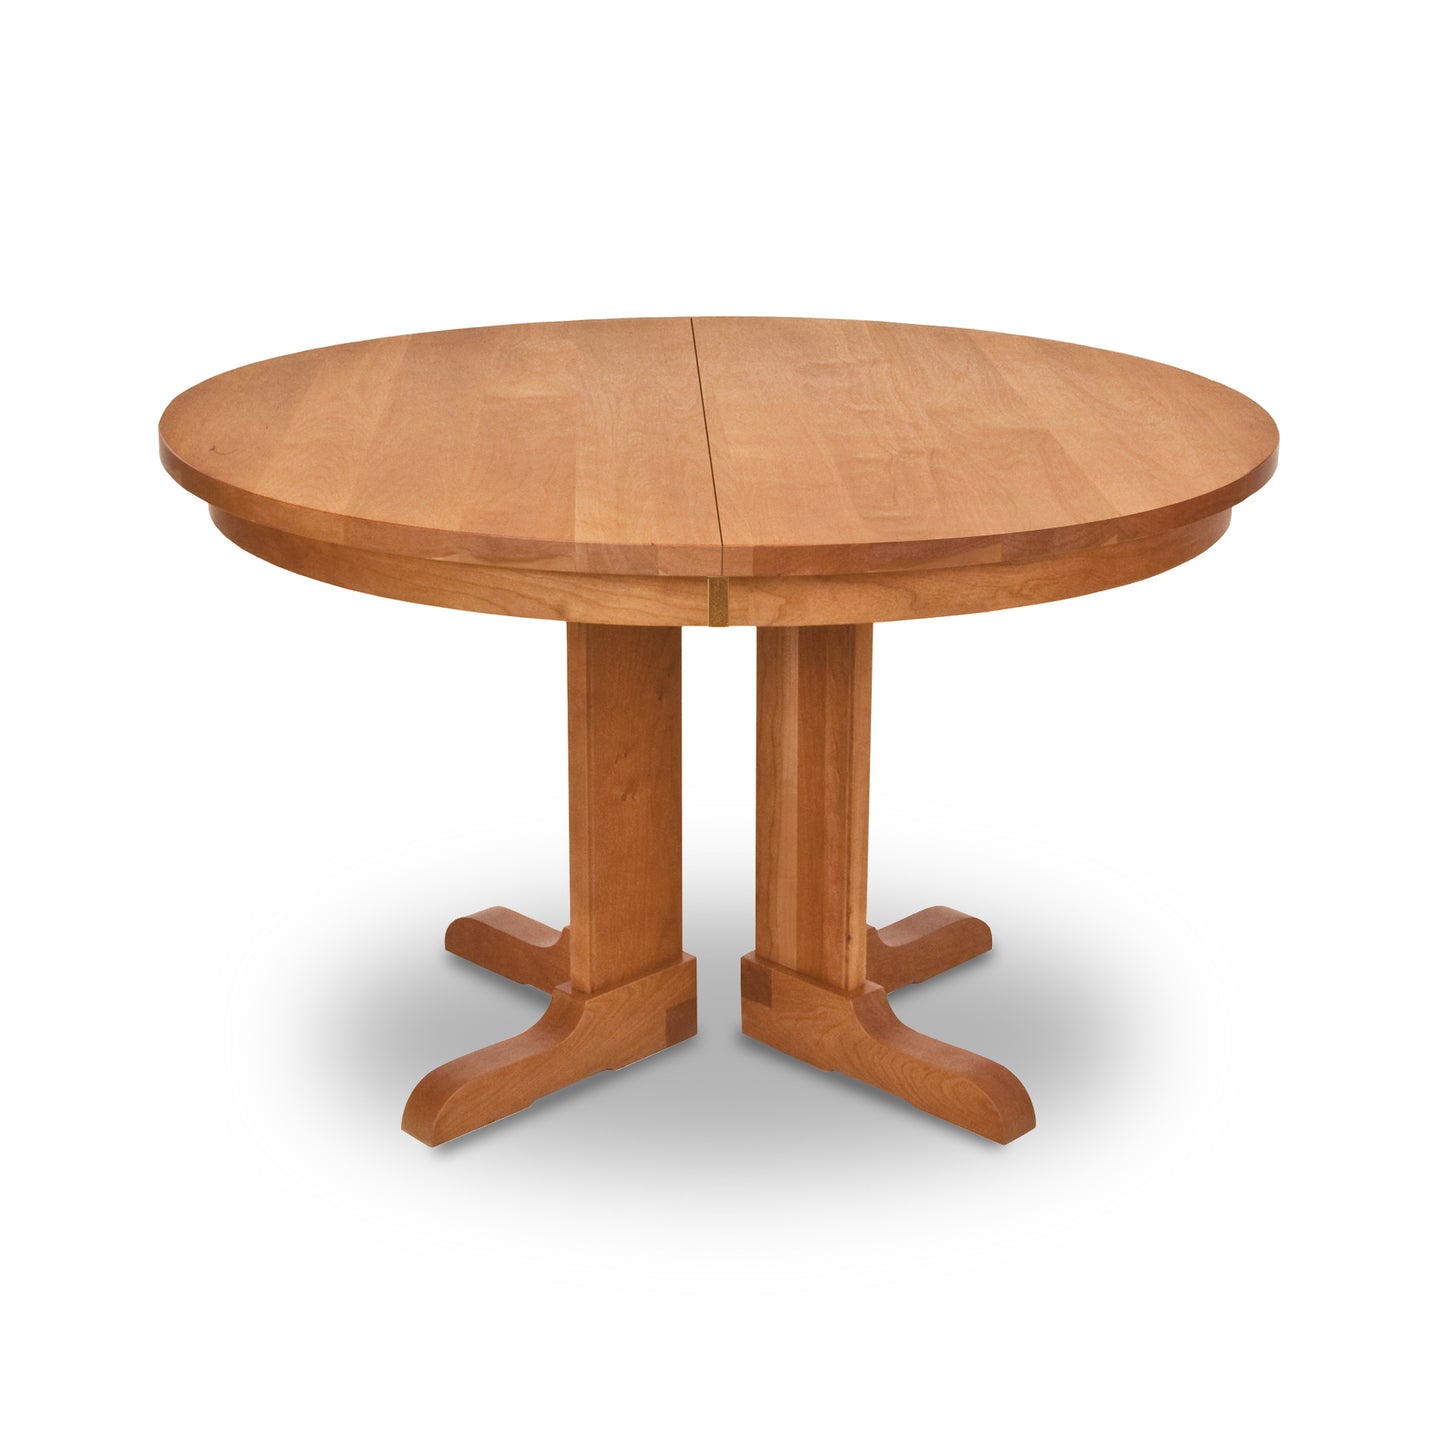 A Vermont Traditions Split Pedestal Round Extension Table by Lyndon Furniture, a hand-crafted wooden dining table with two sturdy legs.